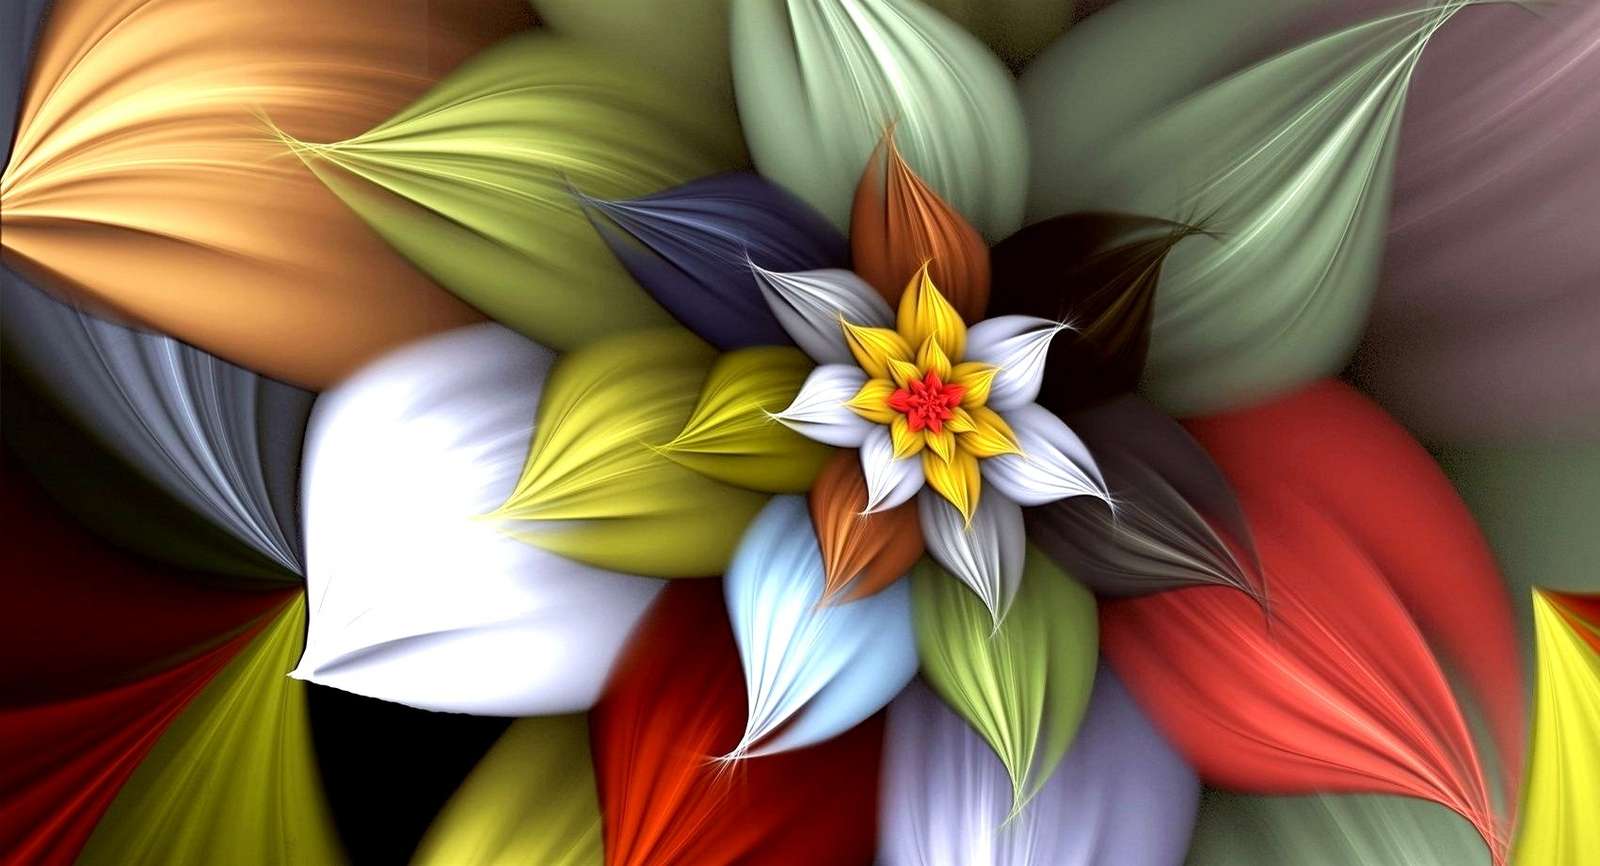 Abstraction-flower online puzzle